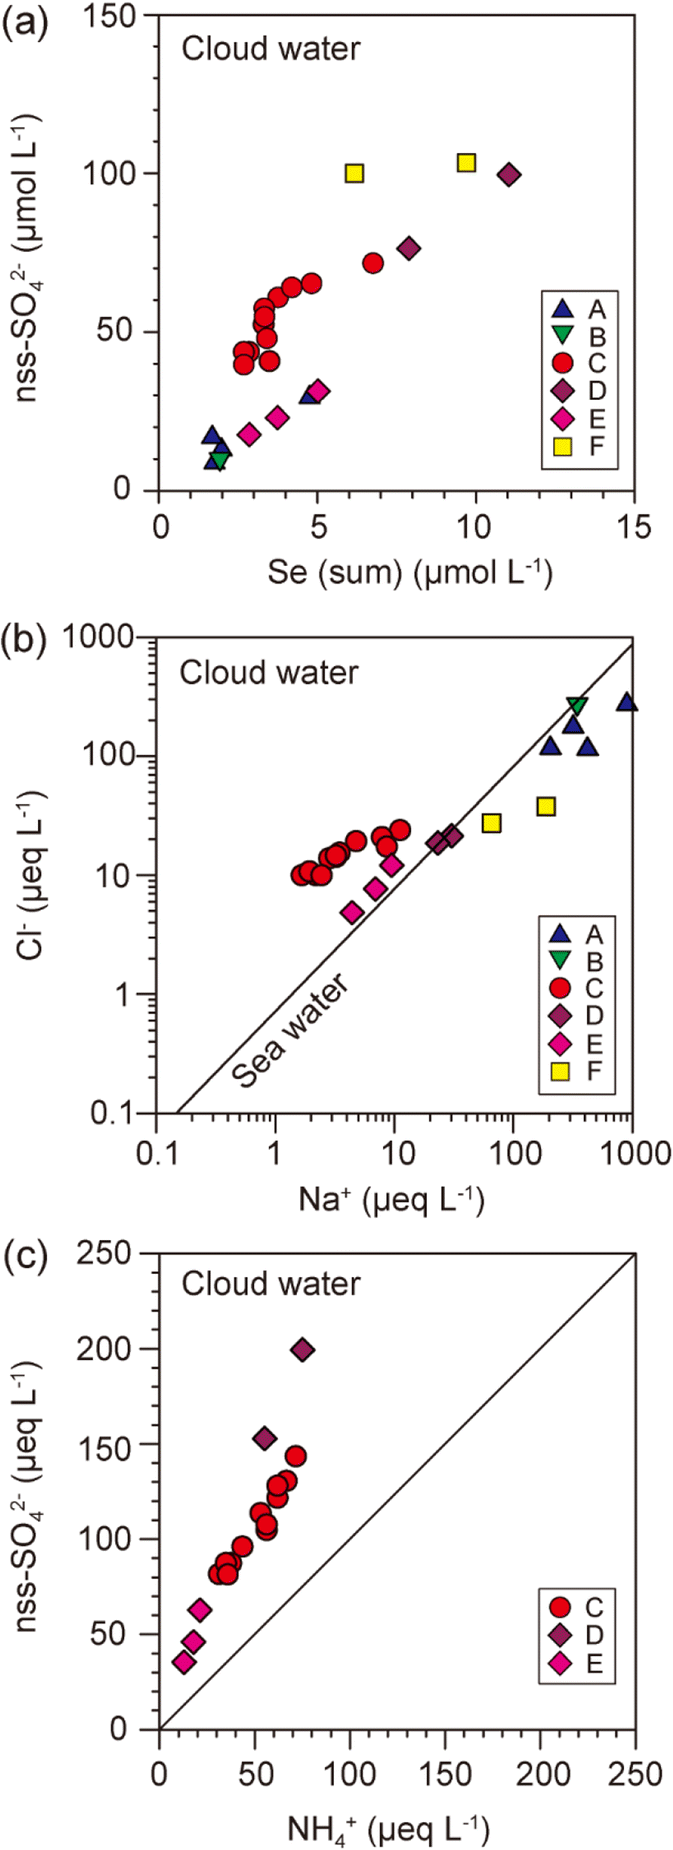 Chemical Characteristics Of Cloud Water And Sulfate Production Under Excess Hydrogen Peroxide In A High Mountainous Region Of Central Japan Springerlink